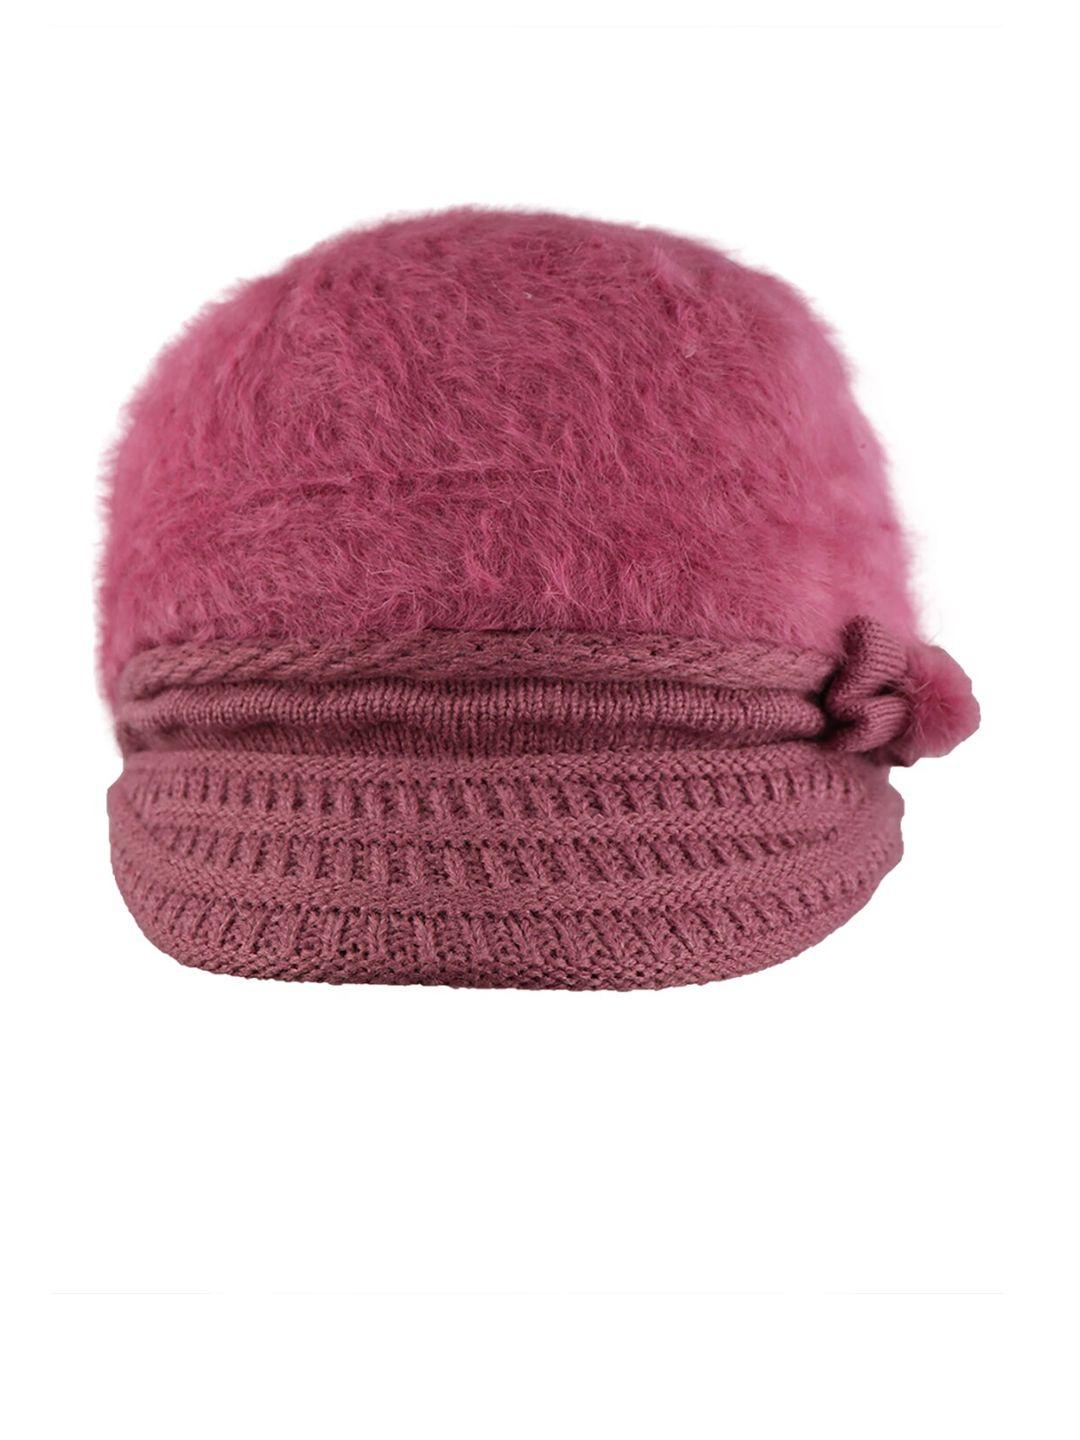 isweven unisex pink solid woven expandable visor cap